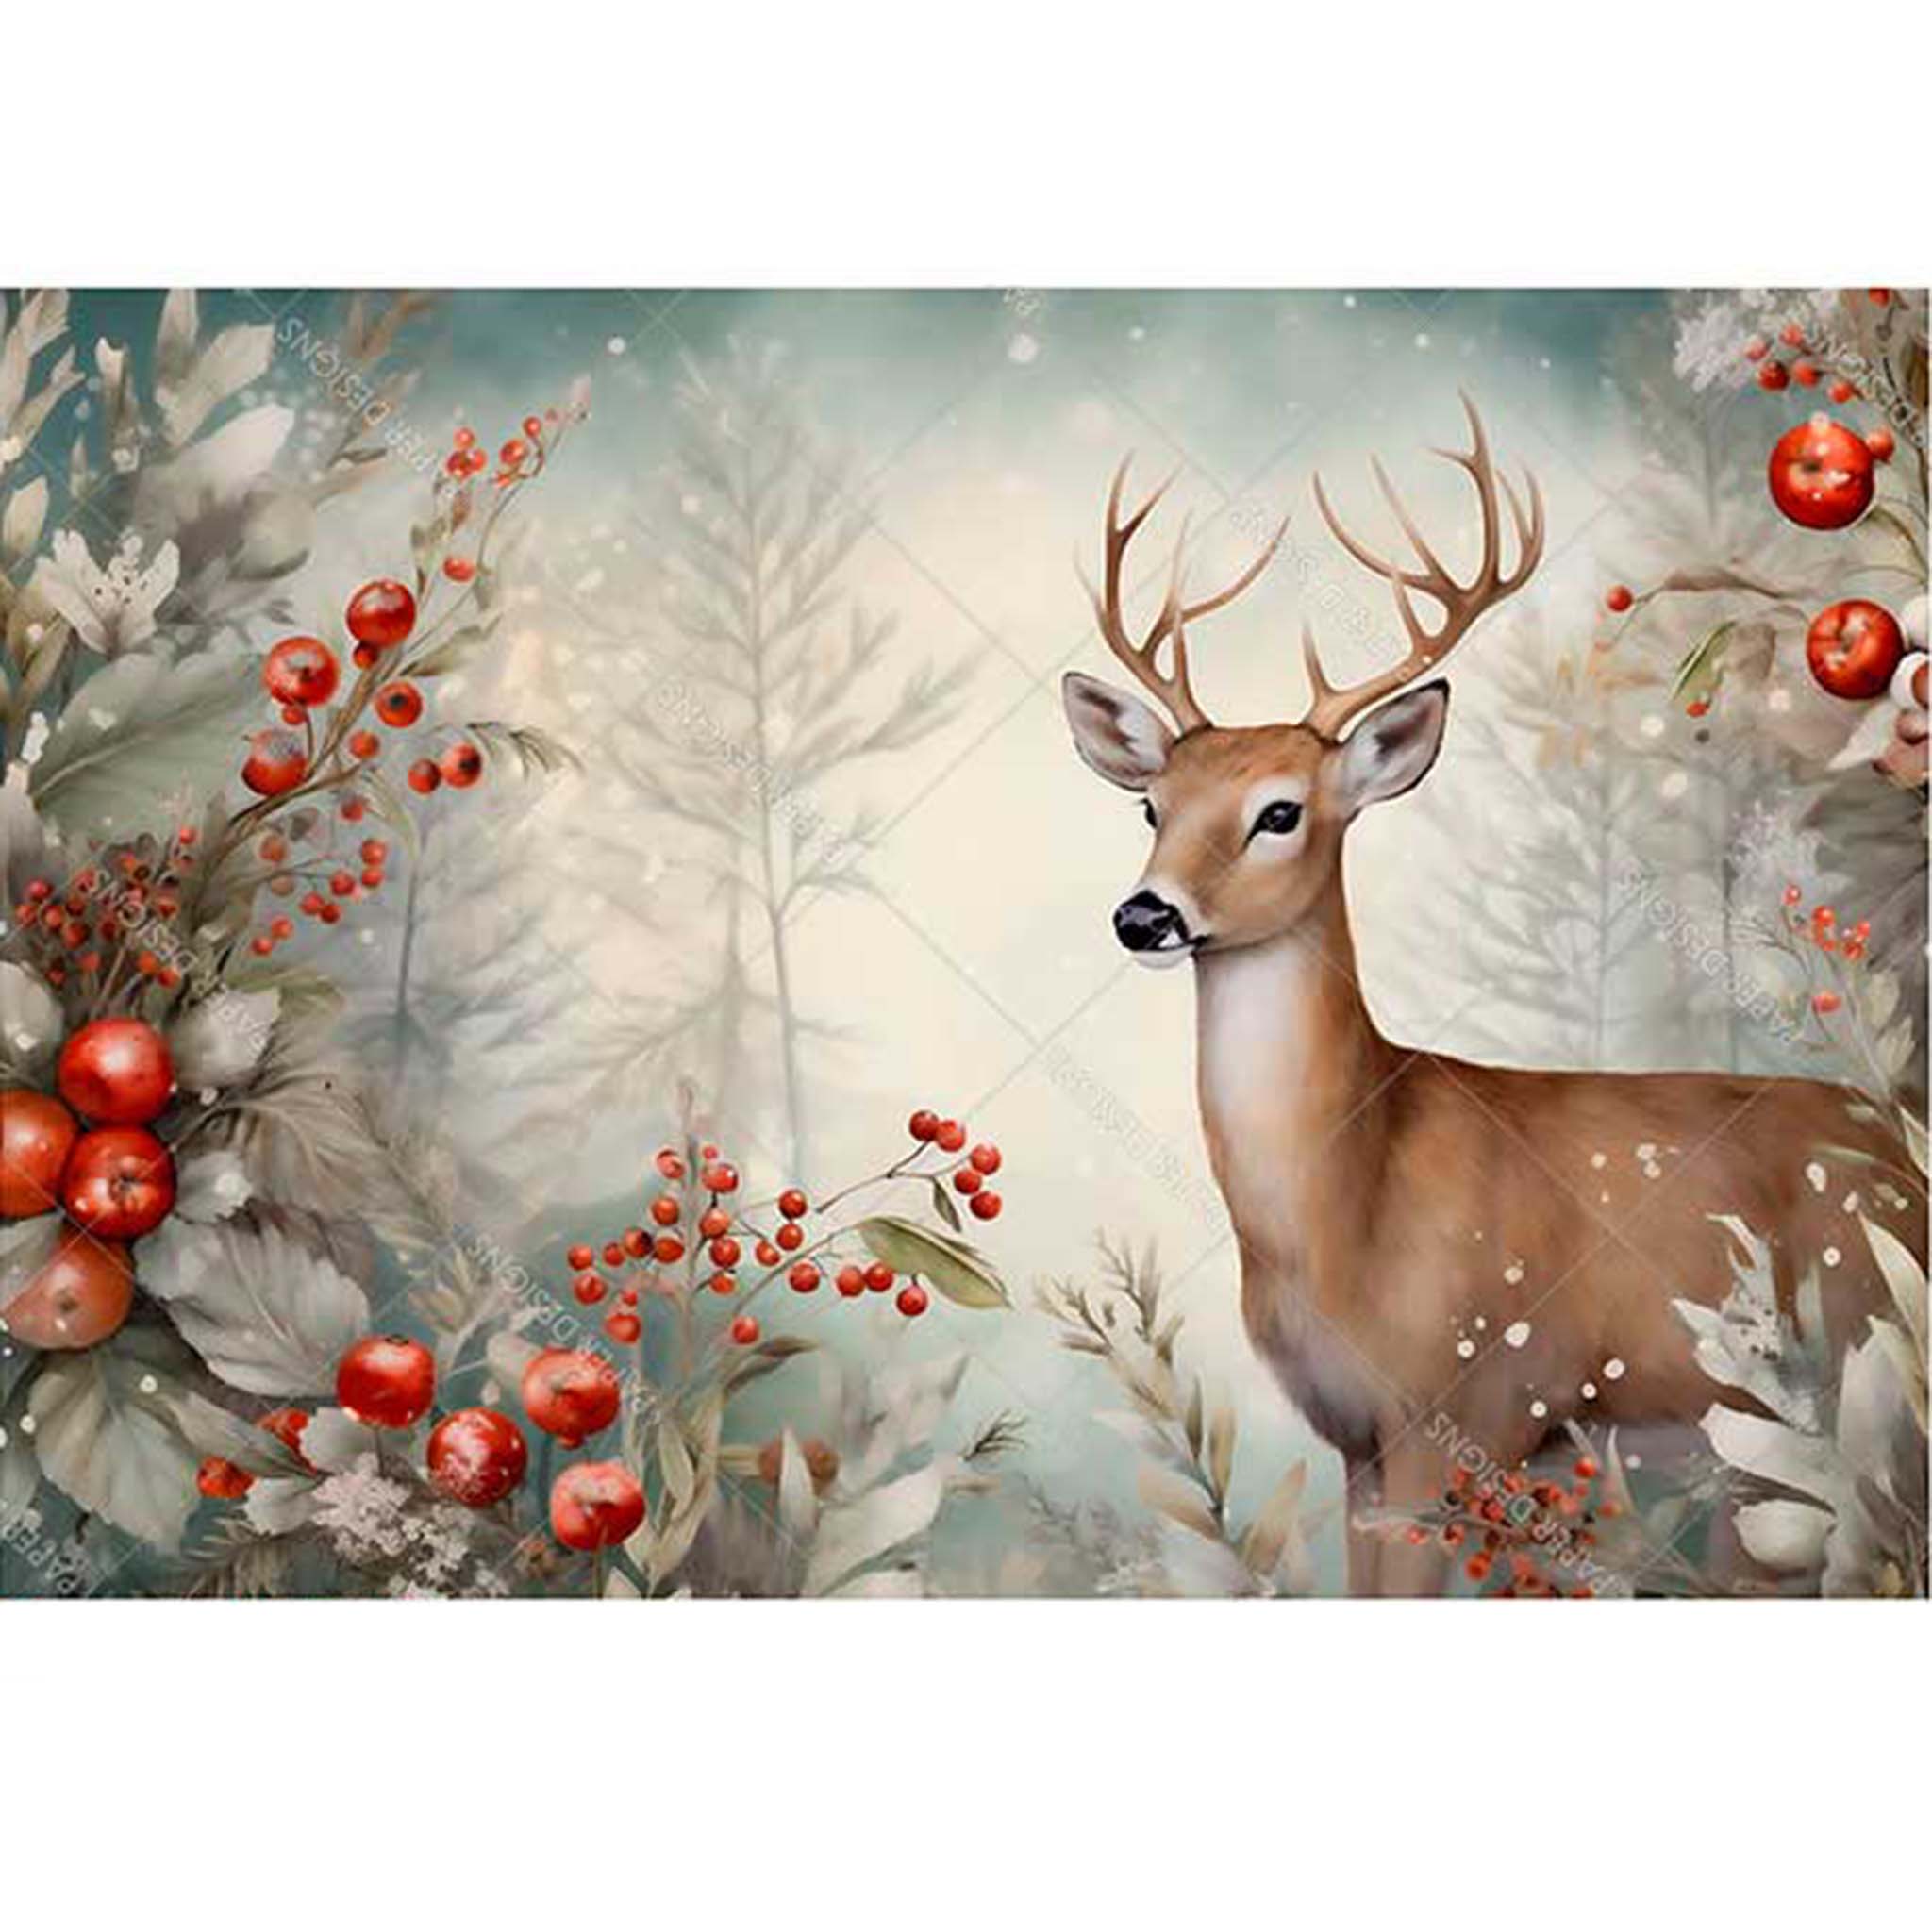 A3 rice paper design featuring a snowy scene of a majestic deer standing in a forest behind bushes of red berries. White borders are on the top and bottom.